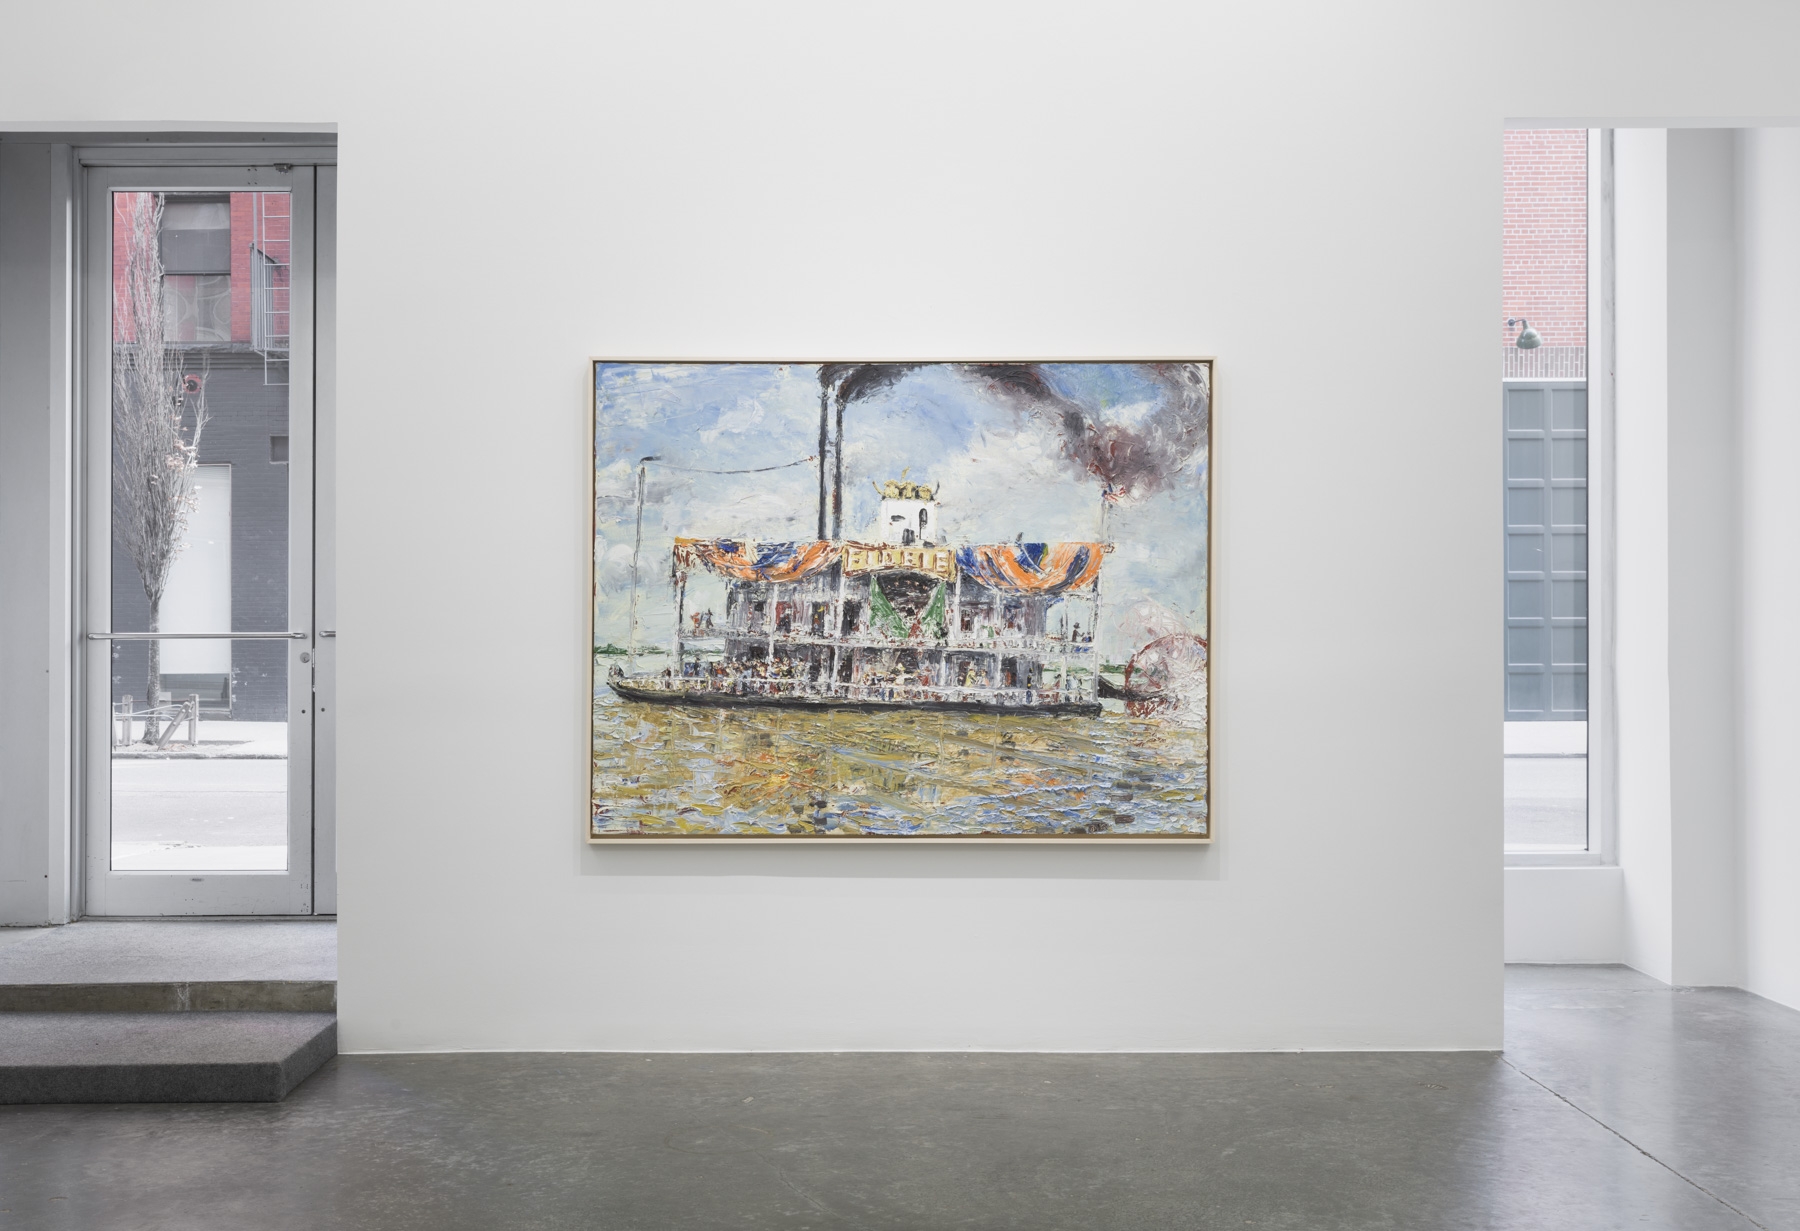 Installation View of John Bradford &quot;By Land and By Sea&quot;, February 27 - June 12, 2020,&nbsp;at Anna Zorina Gallery, New York City.